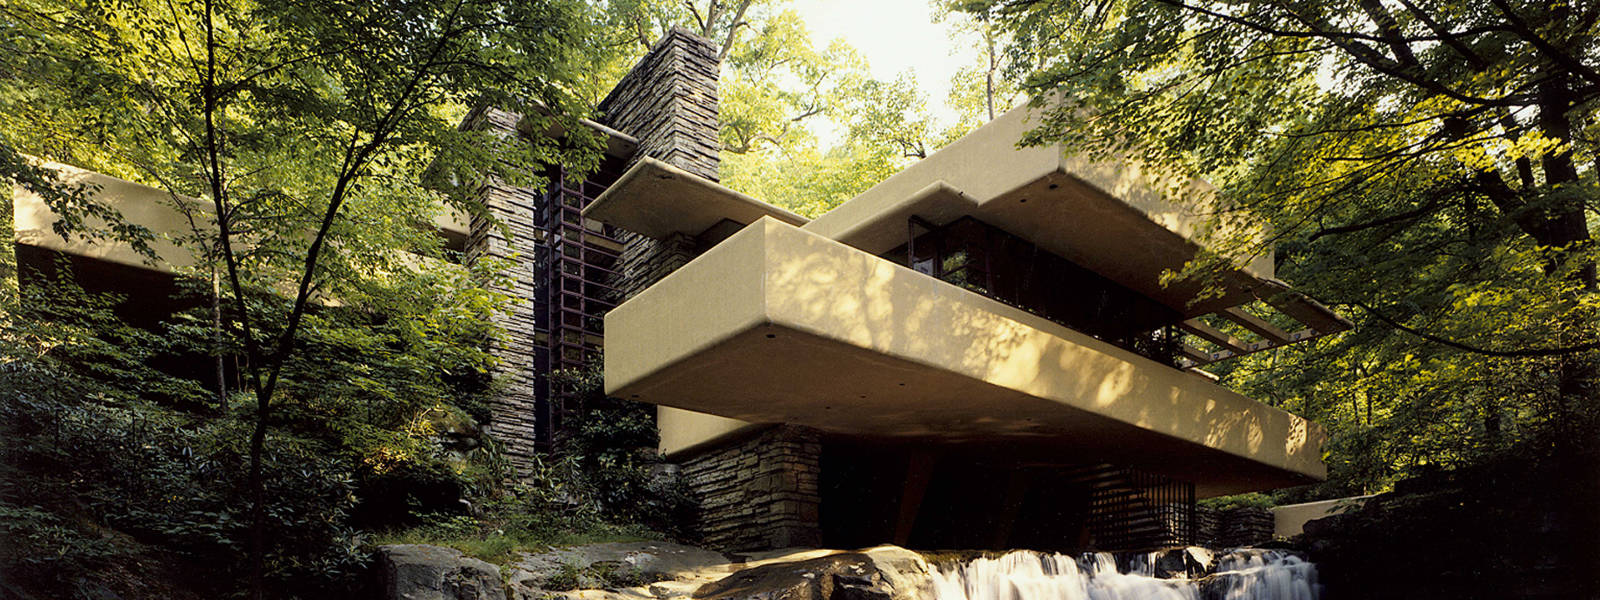 Fallingwater Among Frank Lloyd Wright Sites Nominated to the UNESCO World Heritage List